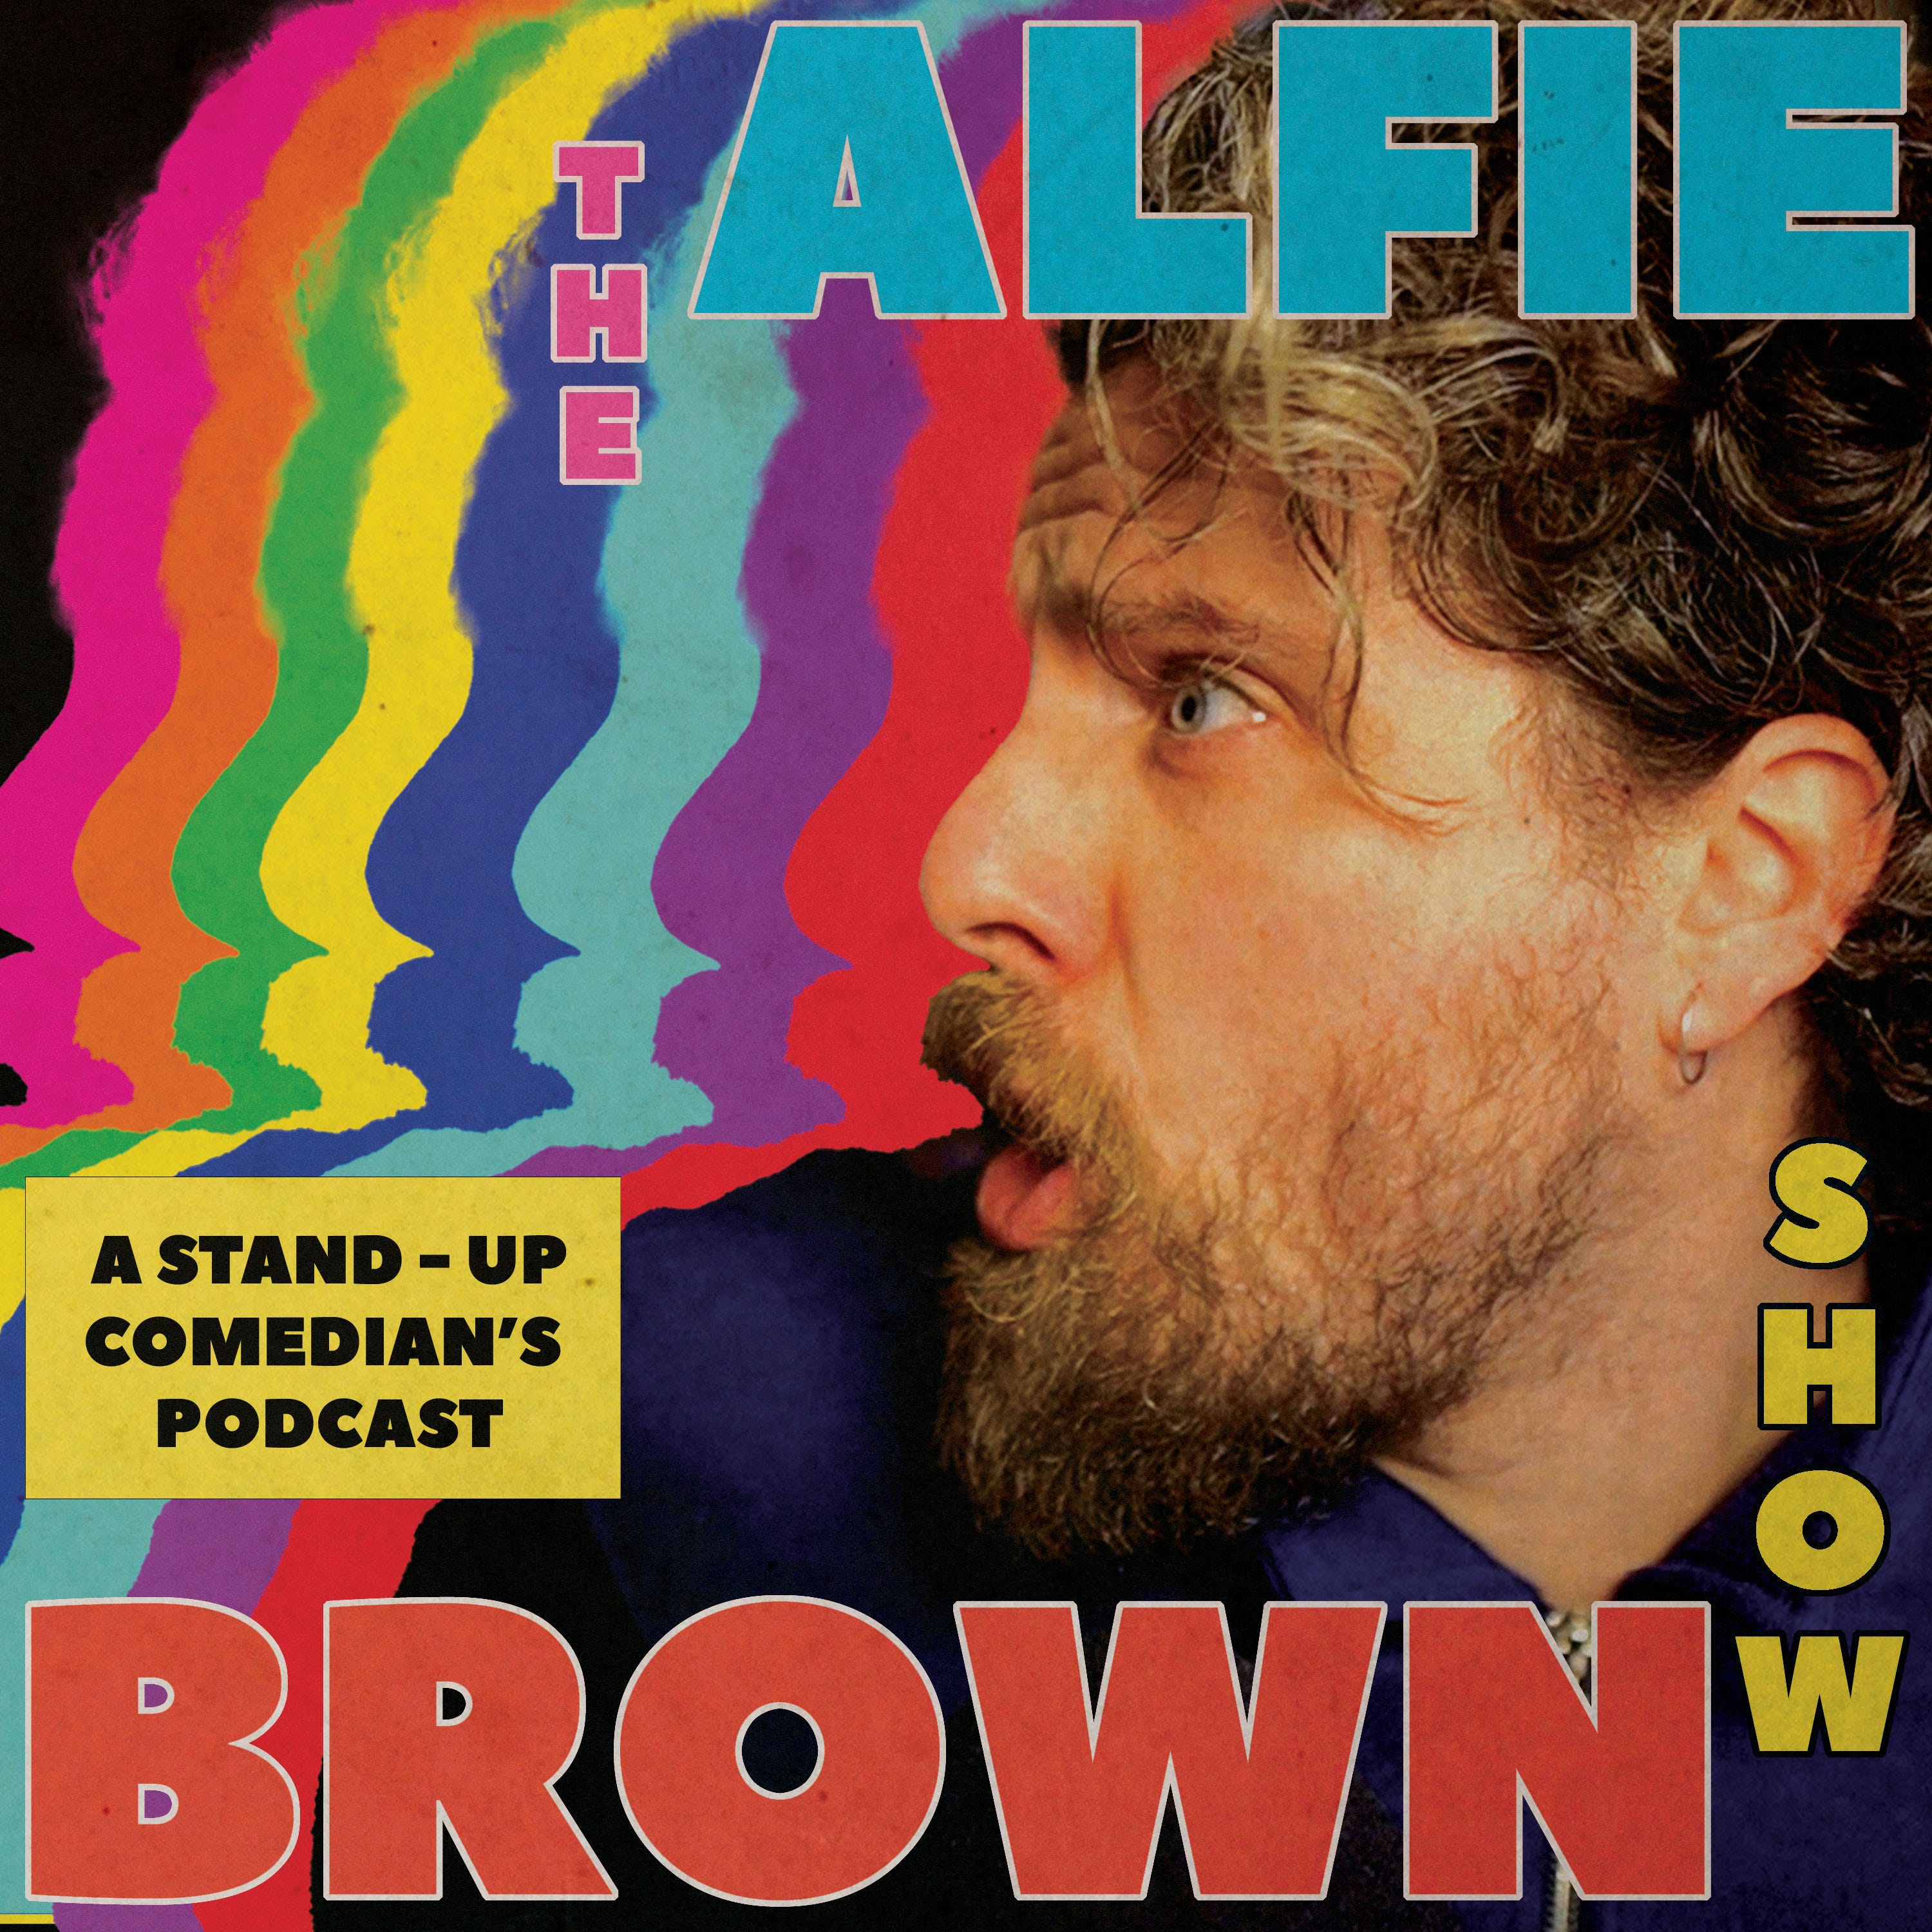 THE SWIRLING MADNESS OF PARENTHOOD - EPISODE 7 - THE ALFIE BROWN SHOW